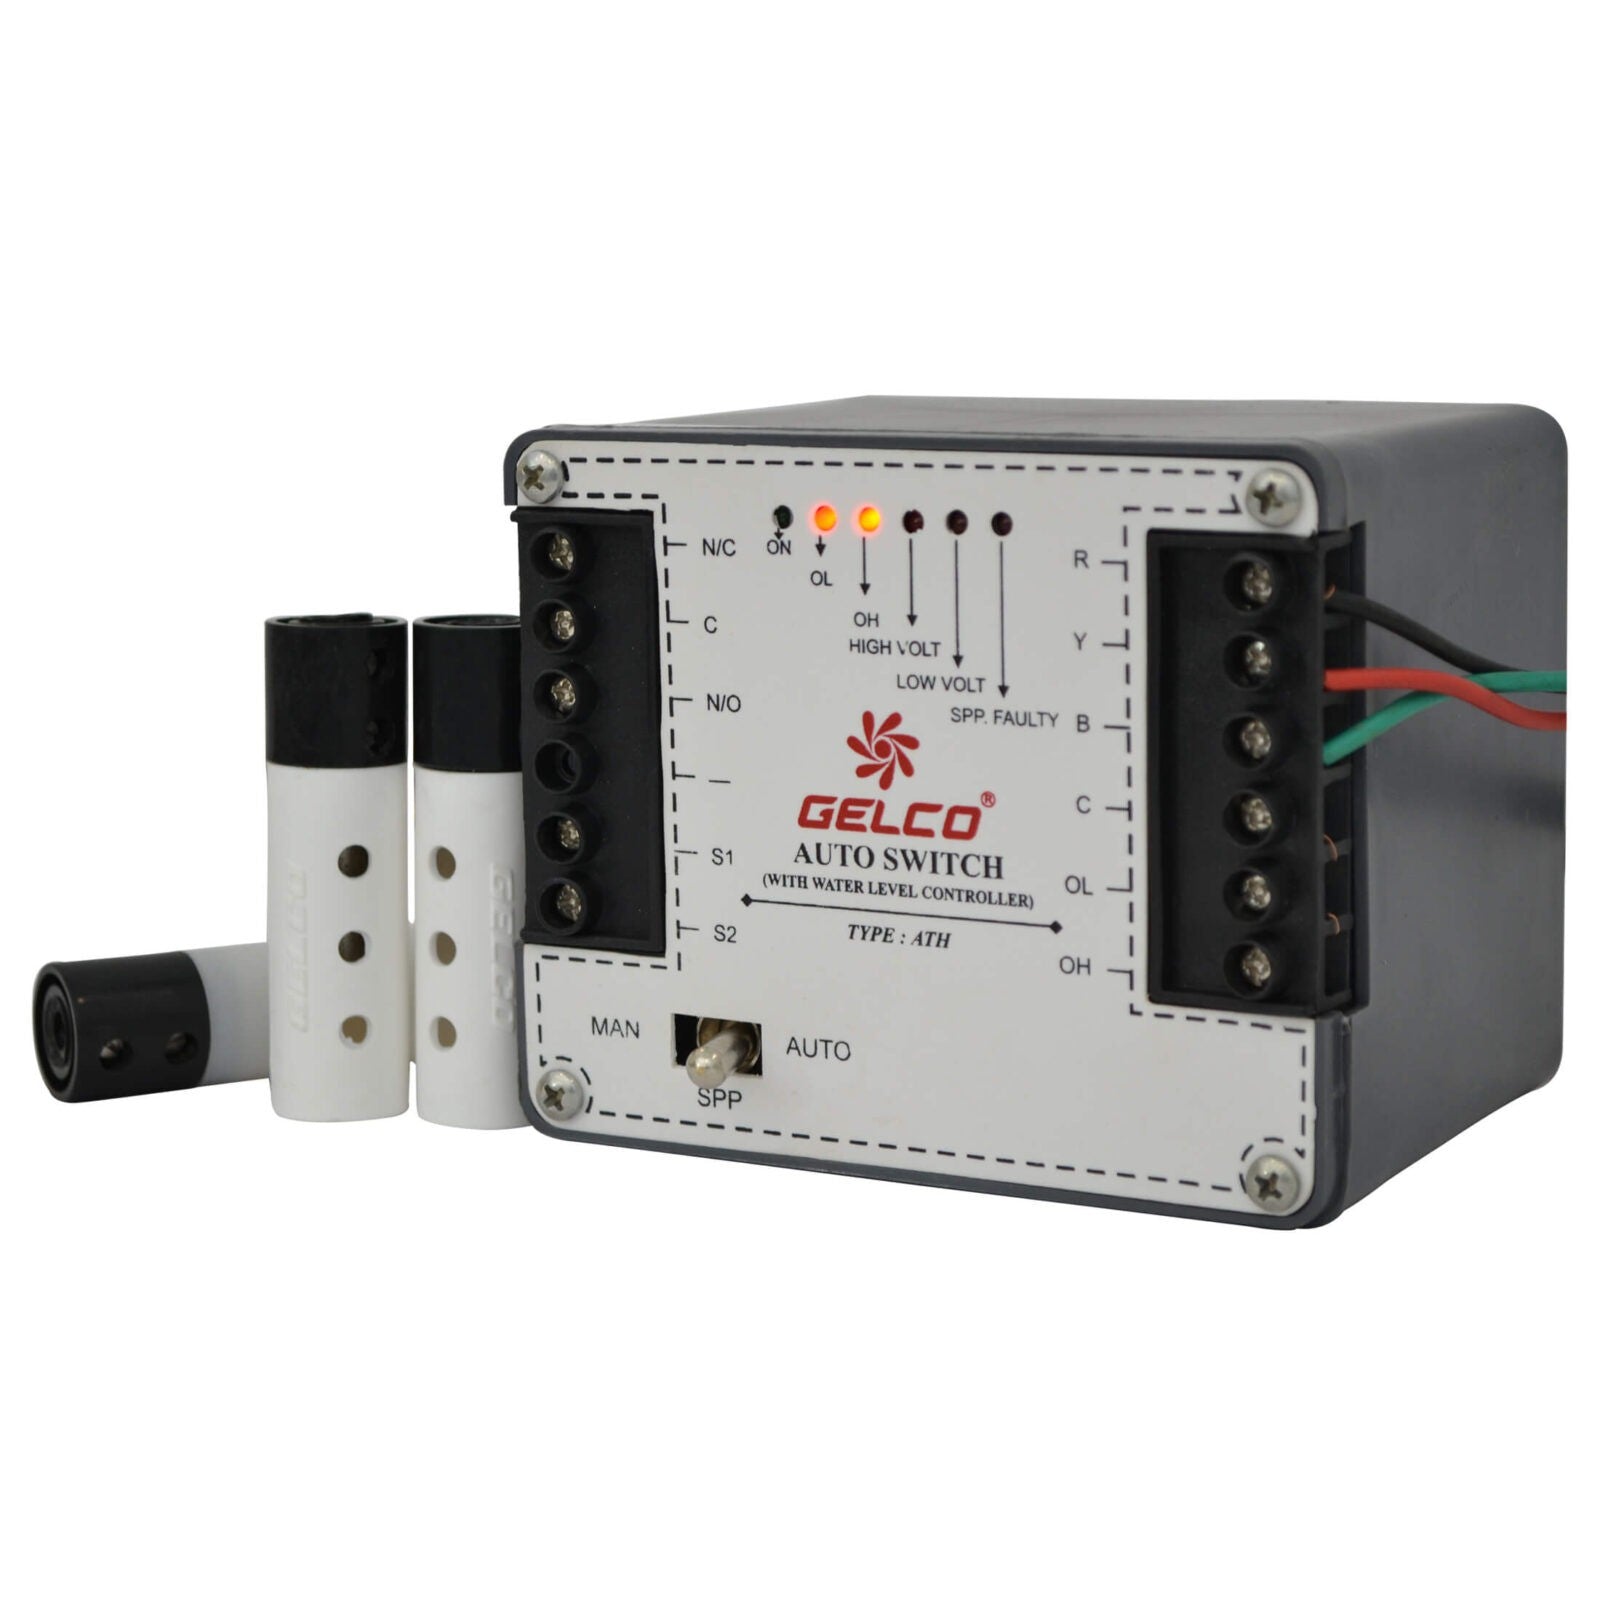 Auto Switch +, Efficiently operate Submersible, Monoset pumps, and mot –  Gelco Electronics Pvt. Ltd.